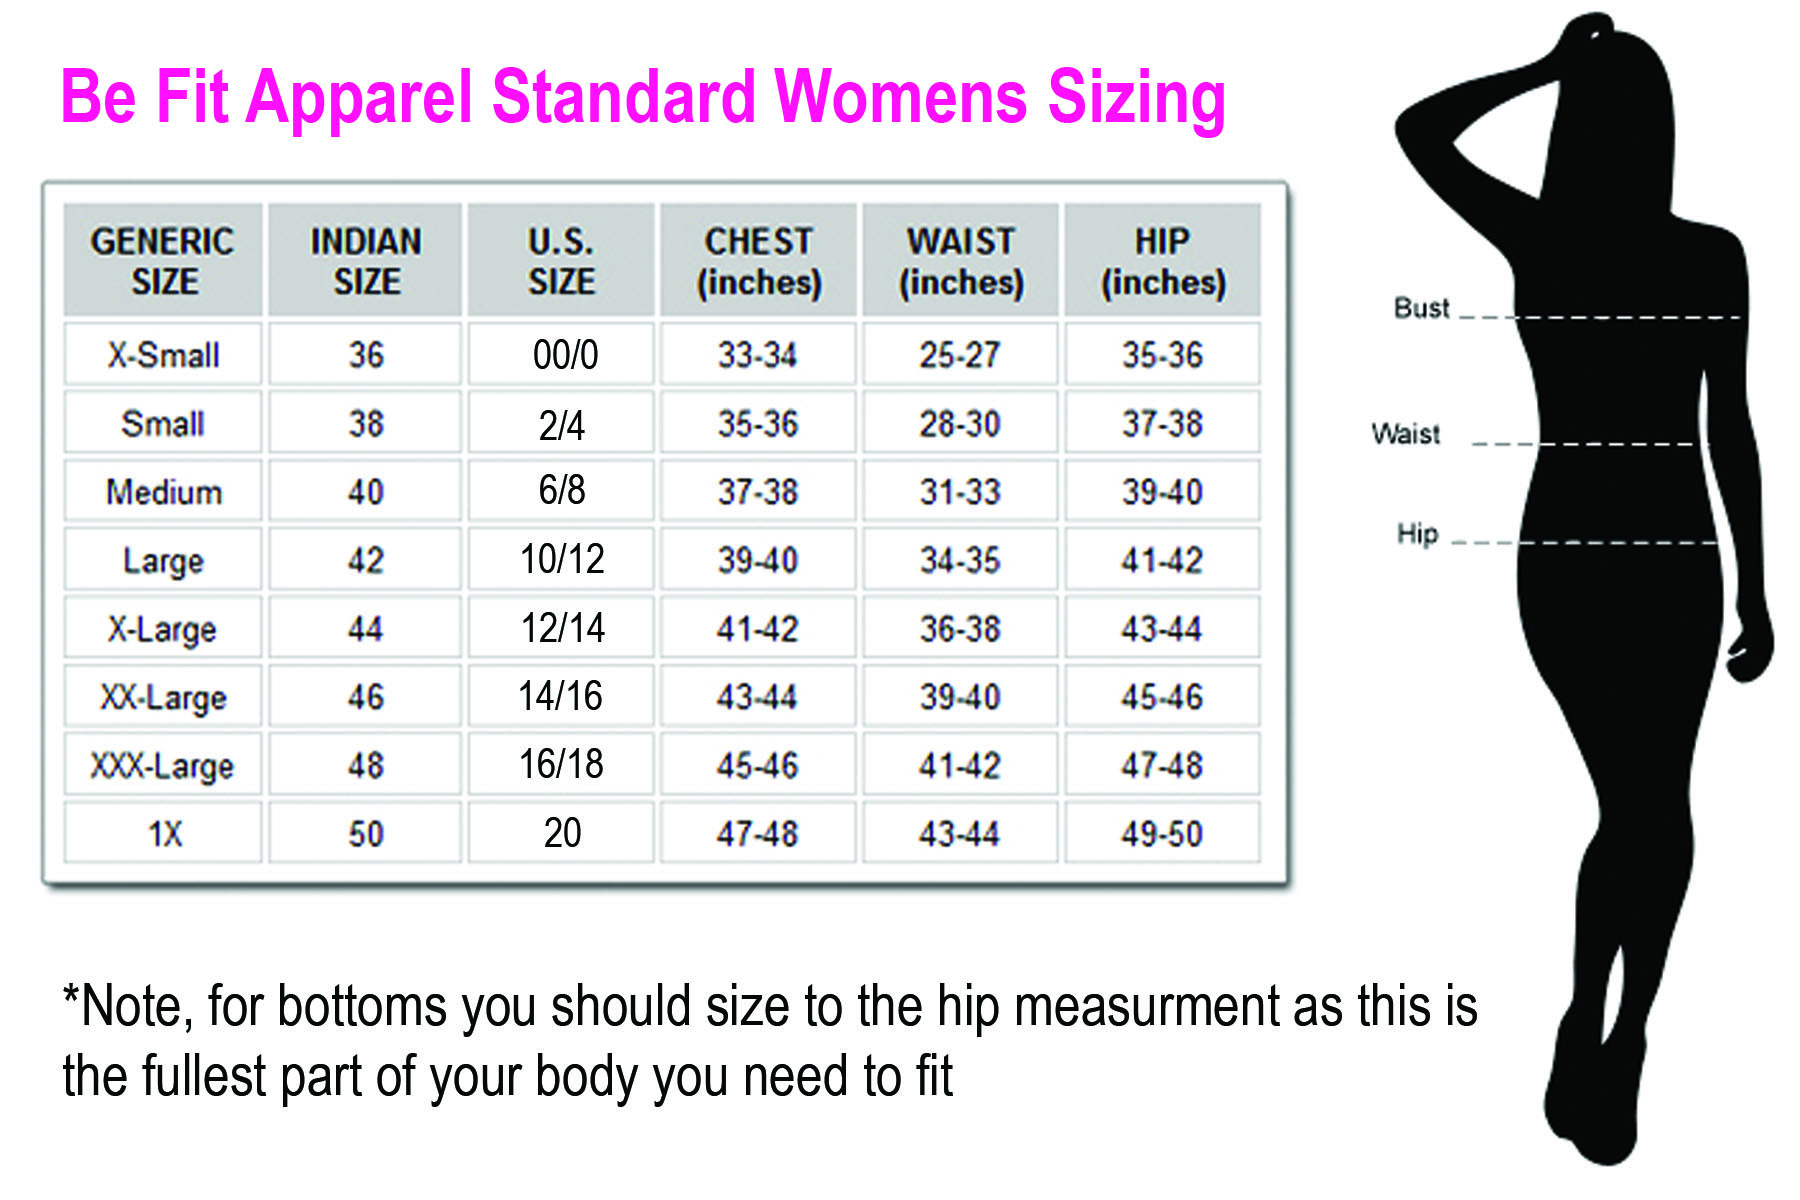 Sizing - Be Fit Apparel